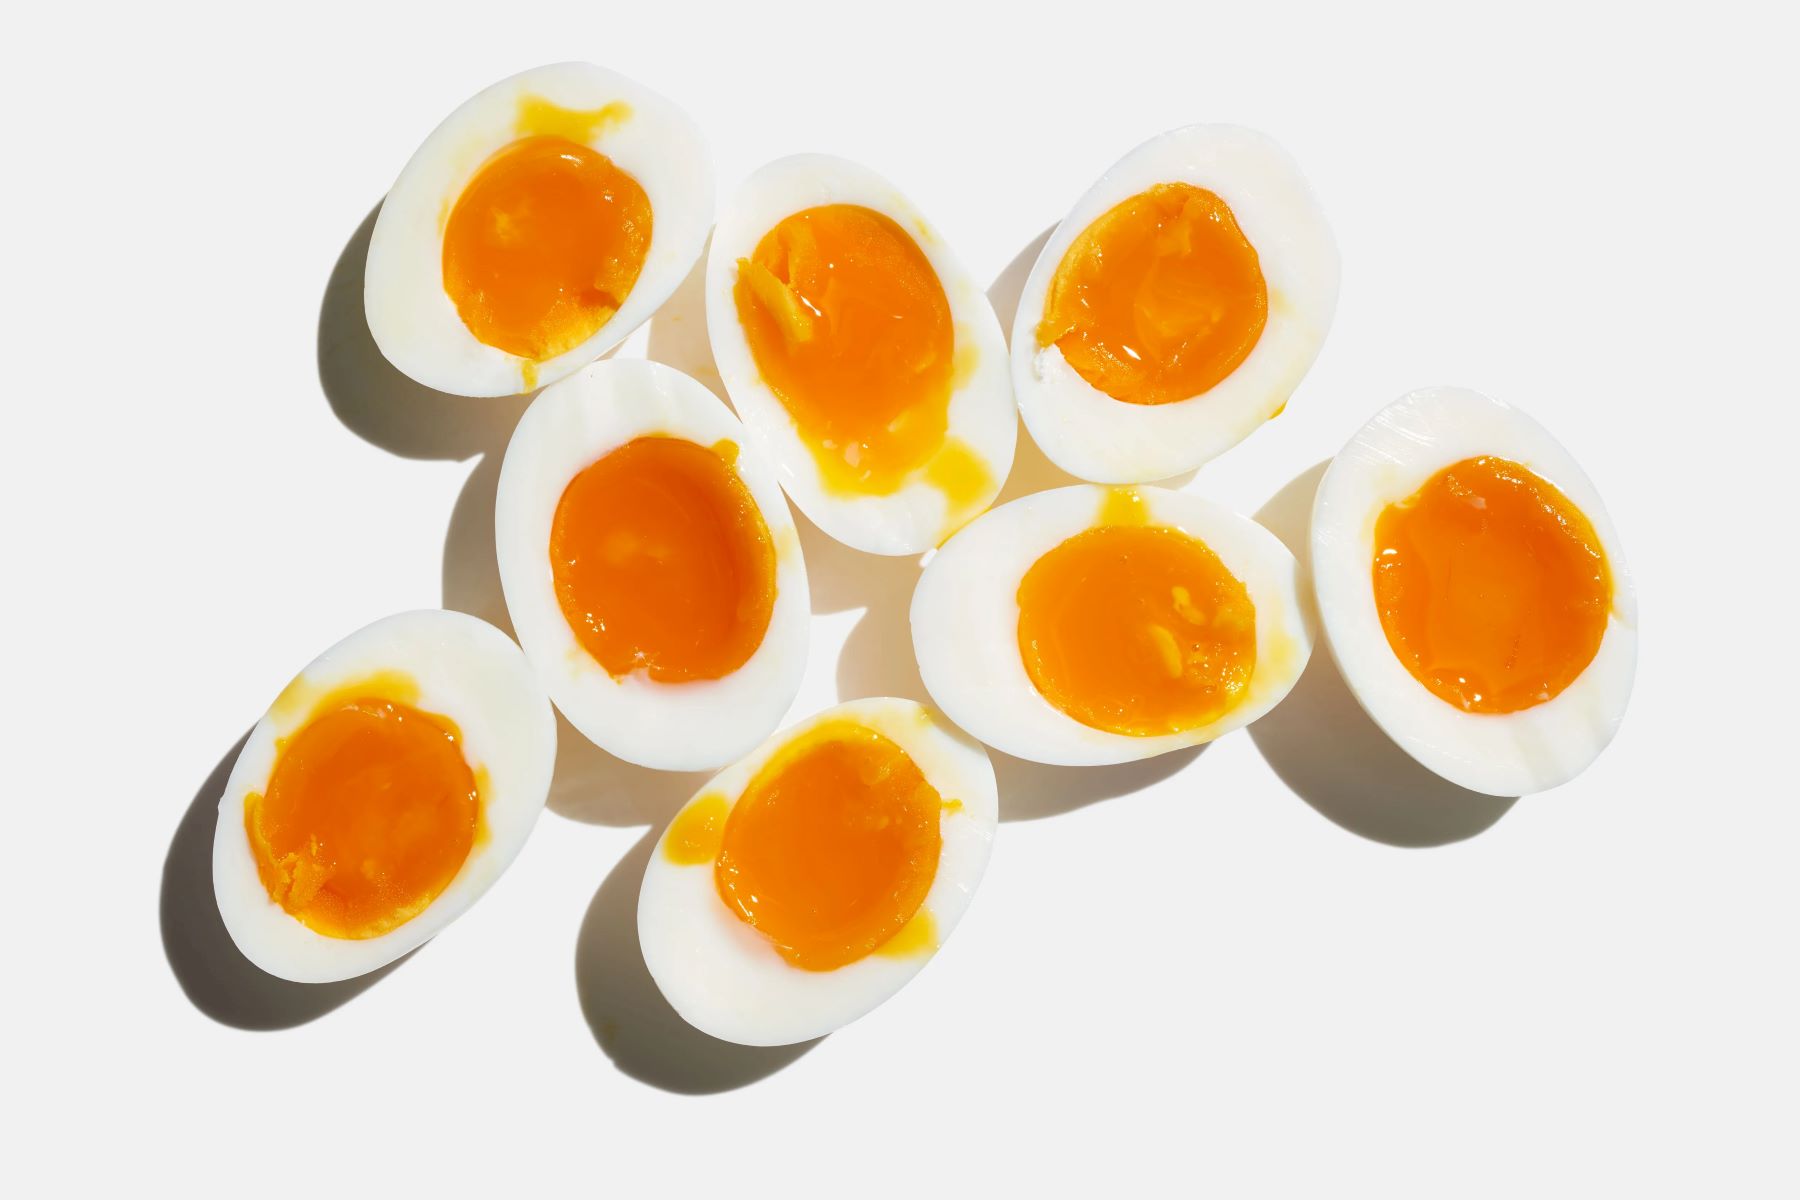 You Won't Believe What Happened After Eating A 30-minute Boiled Egg!